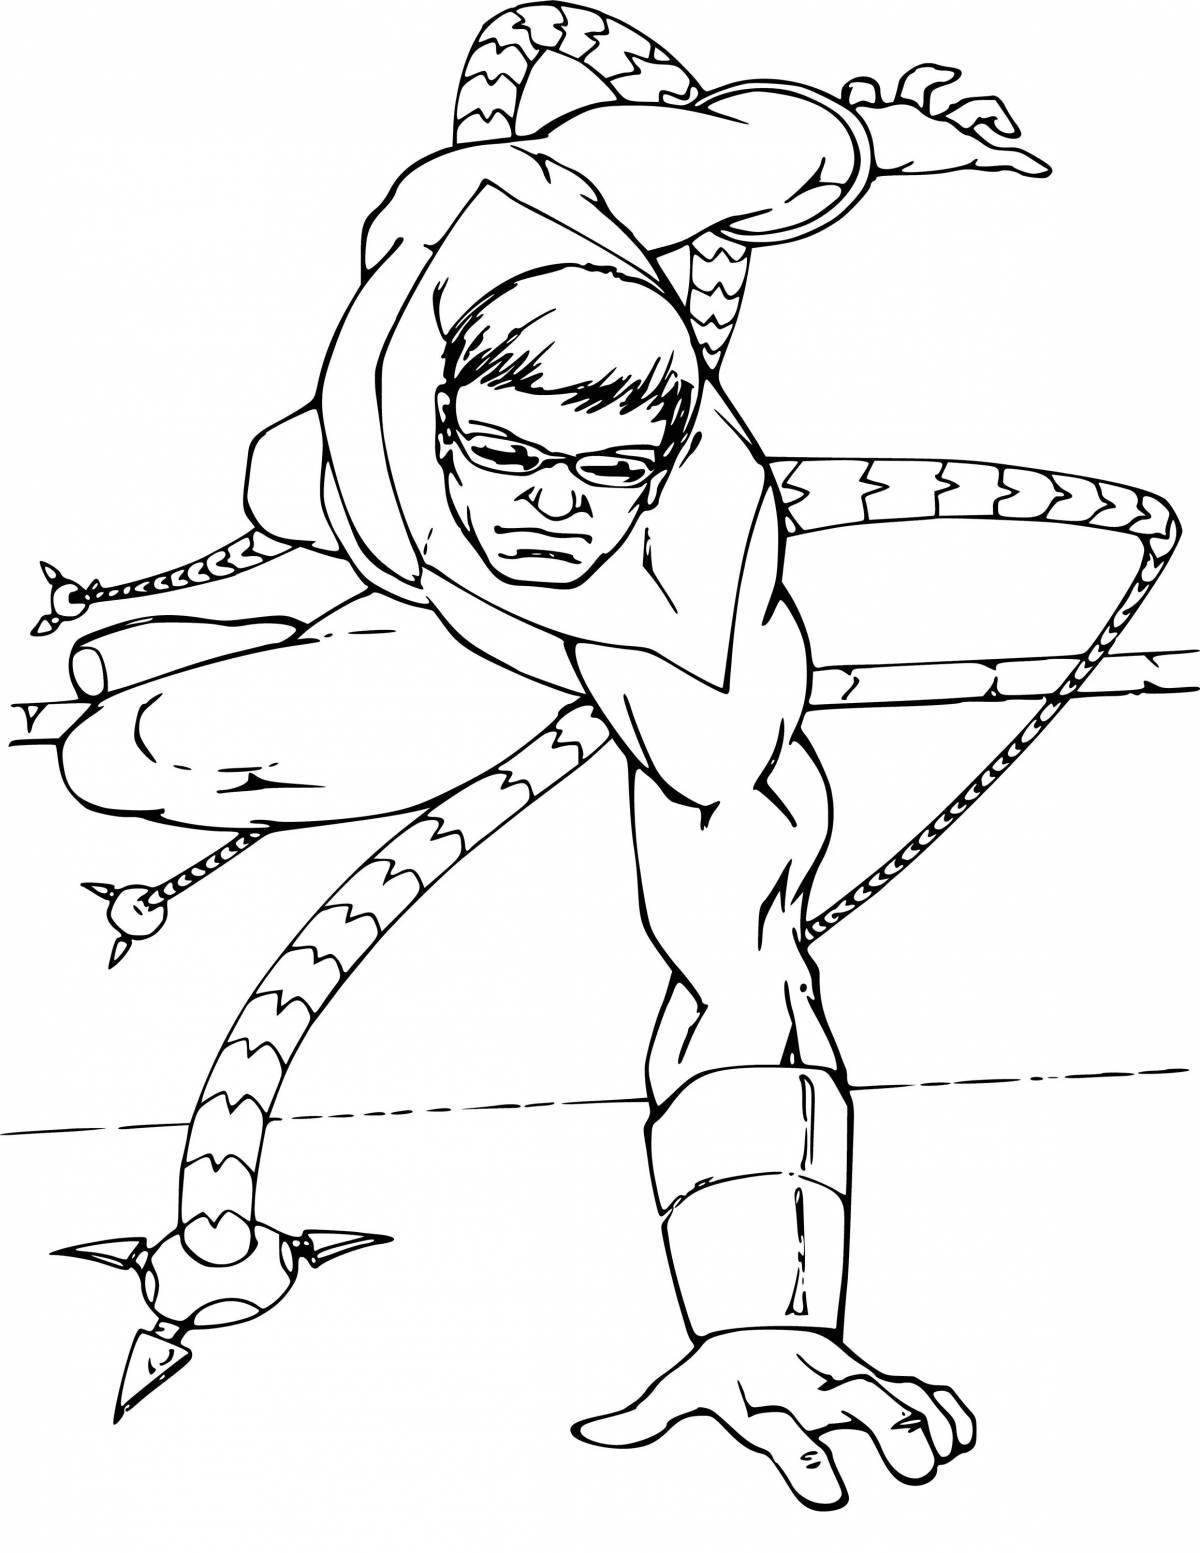 Coloring page impressive doctor octopus